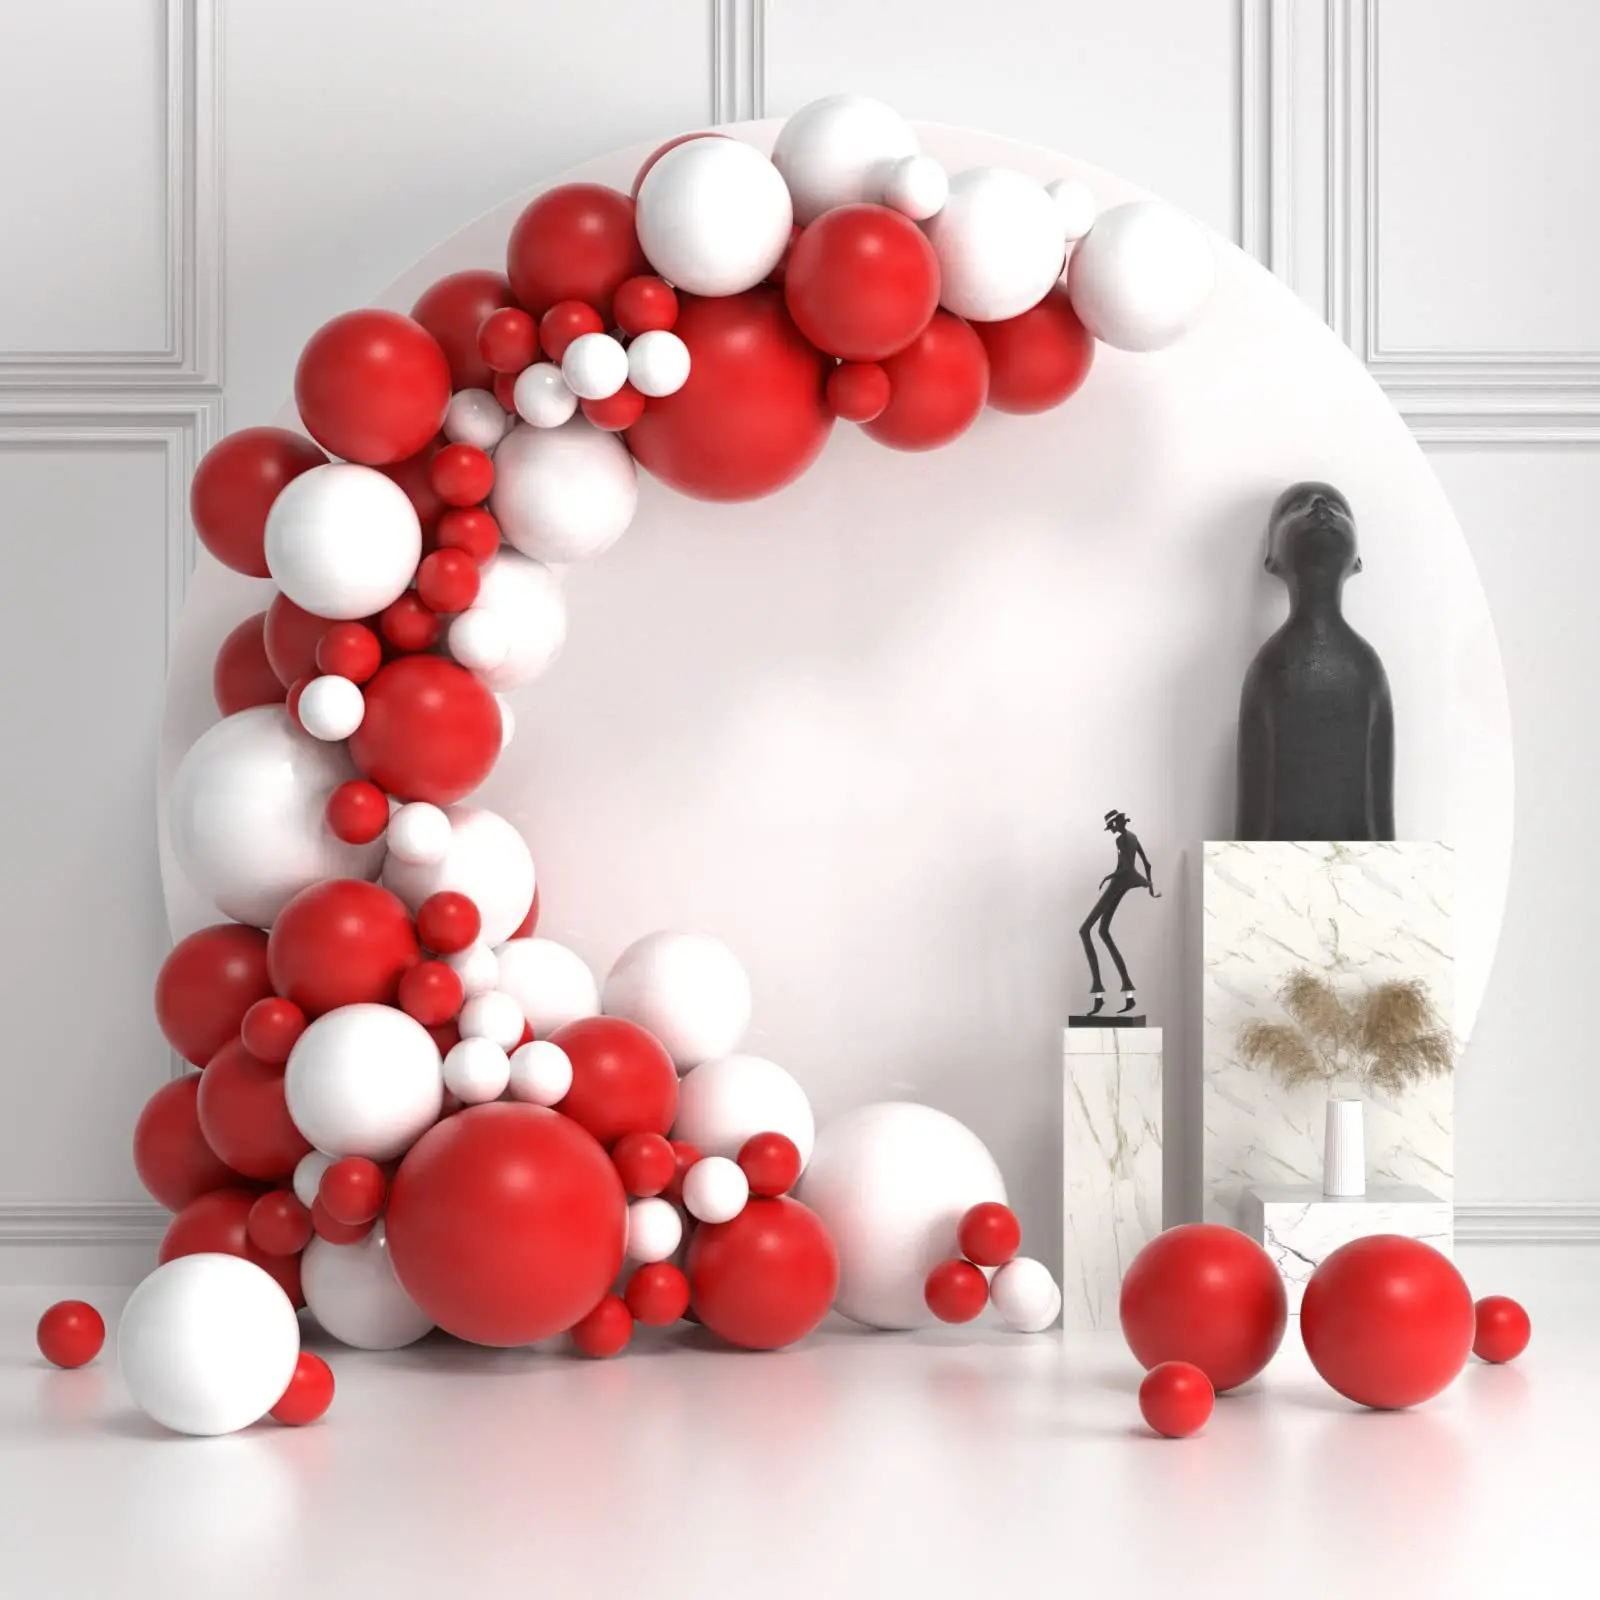 Red And White Balloon Arched Garland Set 127Pcs Christmas Party Outfit  Decorative Balloon Chain - Buy Red And White Balloon Arched Garland Set  127Pcs Christmas Party Outfit Decorative Balloon Chain,Red And White